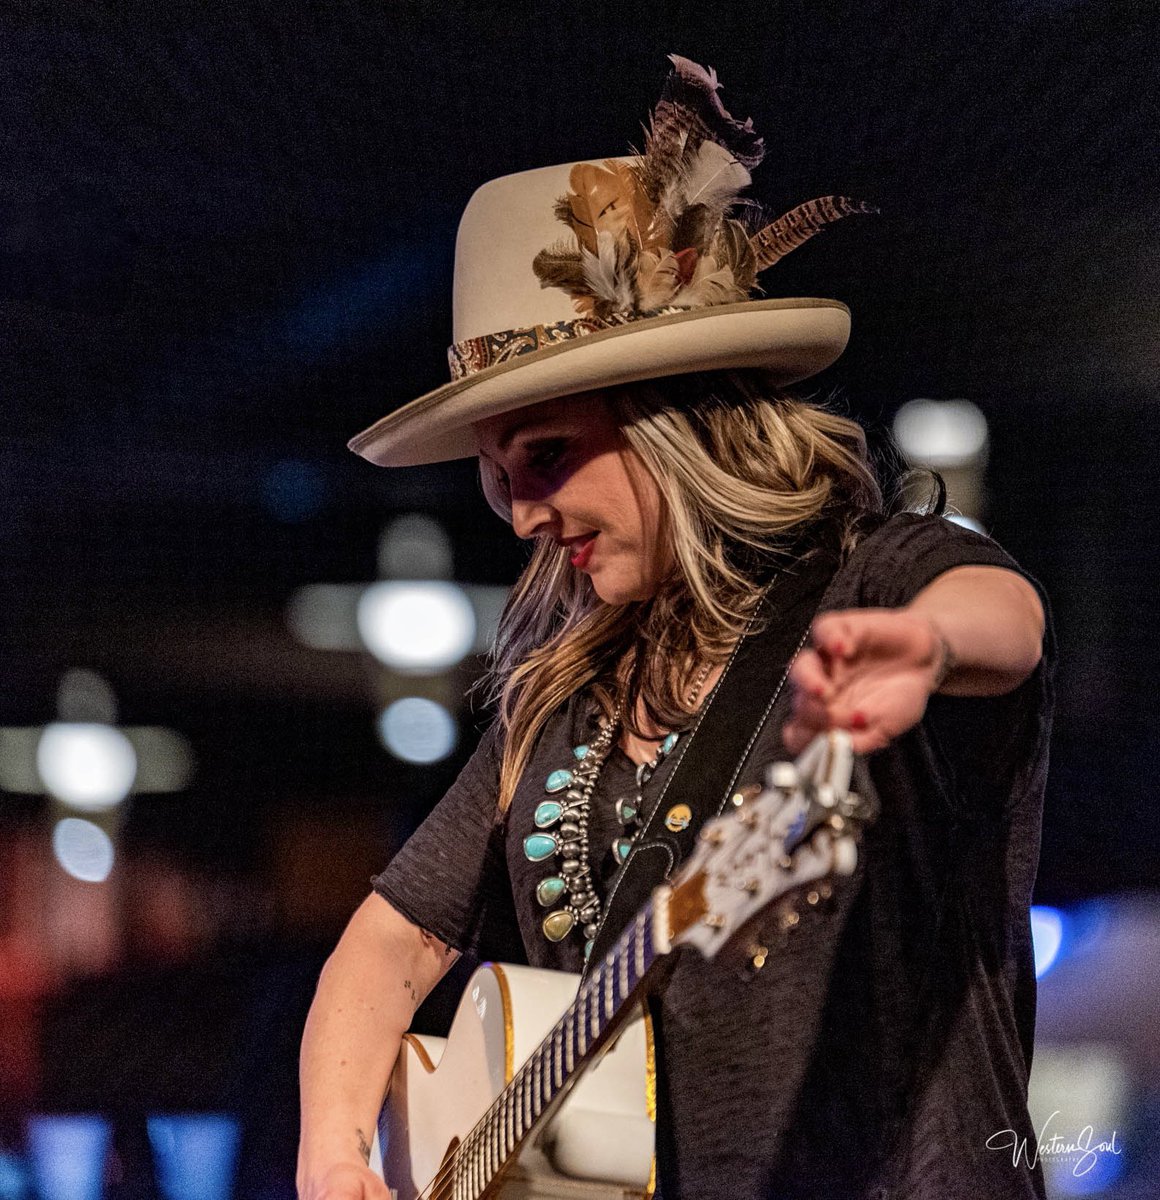 We want to wish the amazing @GettinSweenered a very Happy Birthday! Can’t wait to see another one of her live shows as they’re always such a good time! #sunnysweeney #sunnysweeneyistheshit #happybirthday #standardhatworks #countrymusic #queen